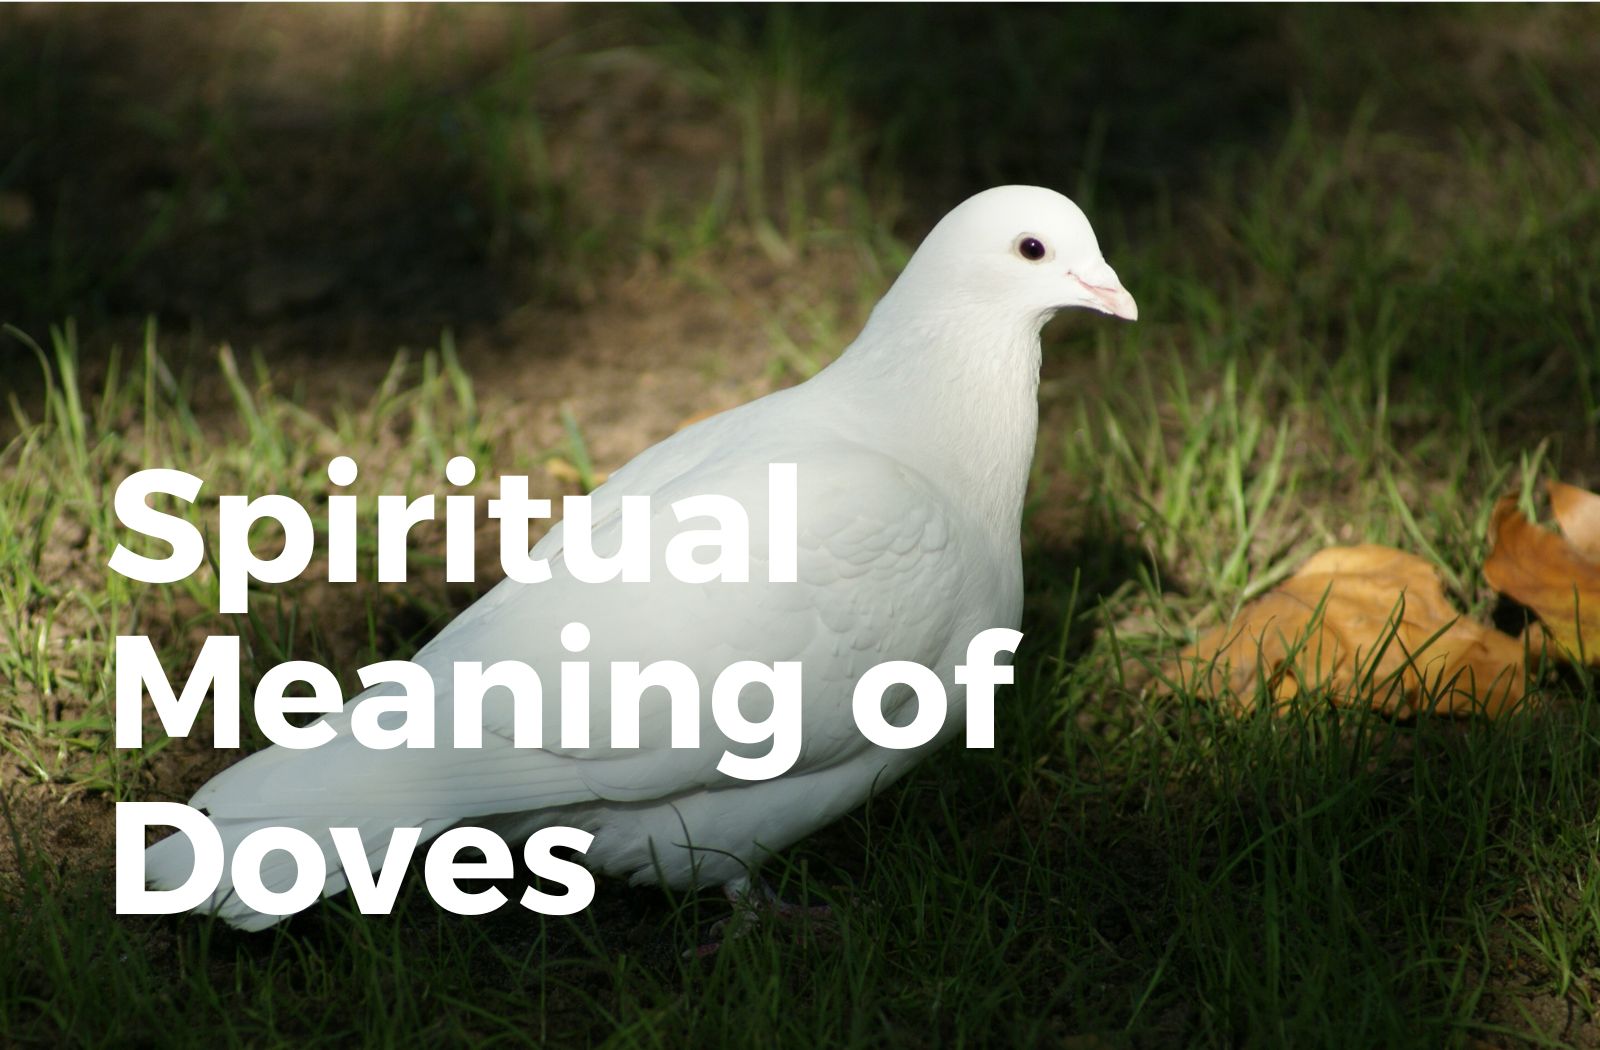 Spiritual meaning of Doves